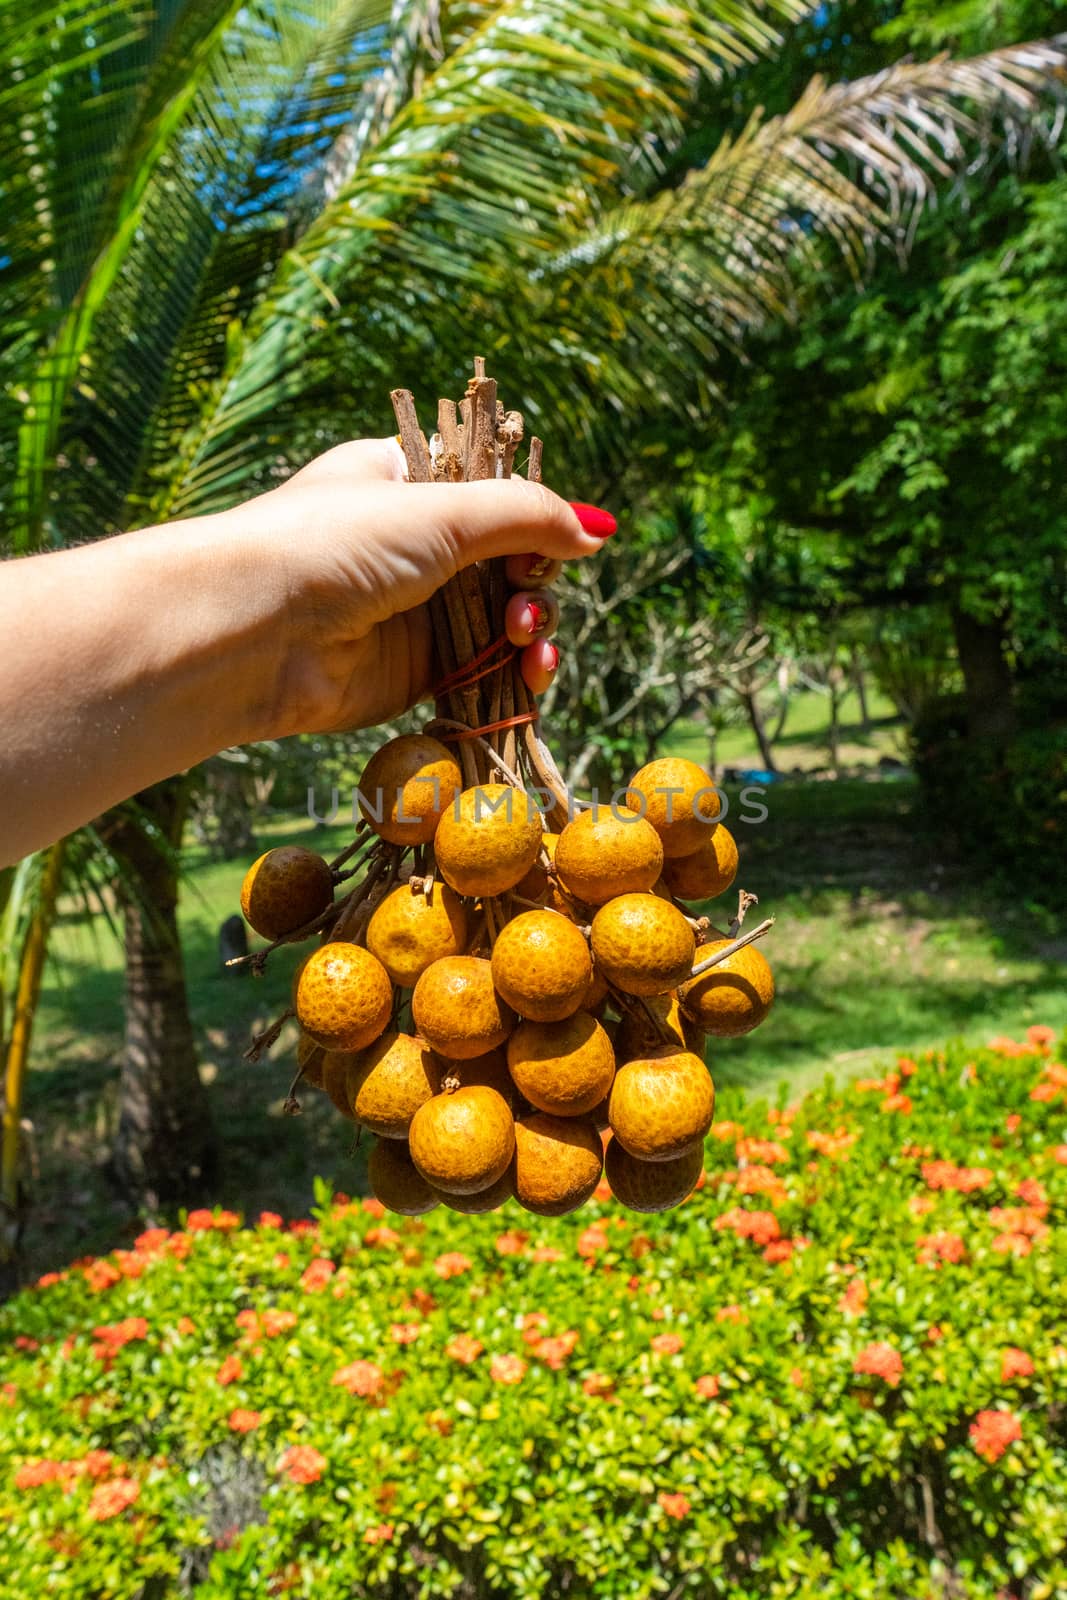 Girl is going to eat longan in a tropical garden. Vitamins, fruits, healthy foods.